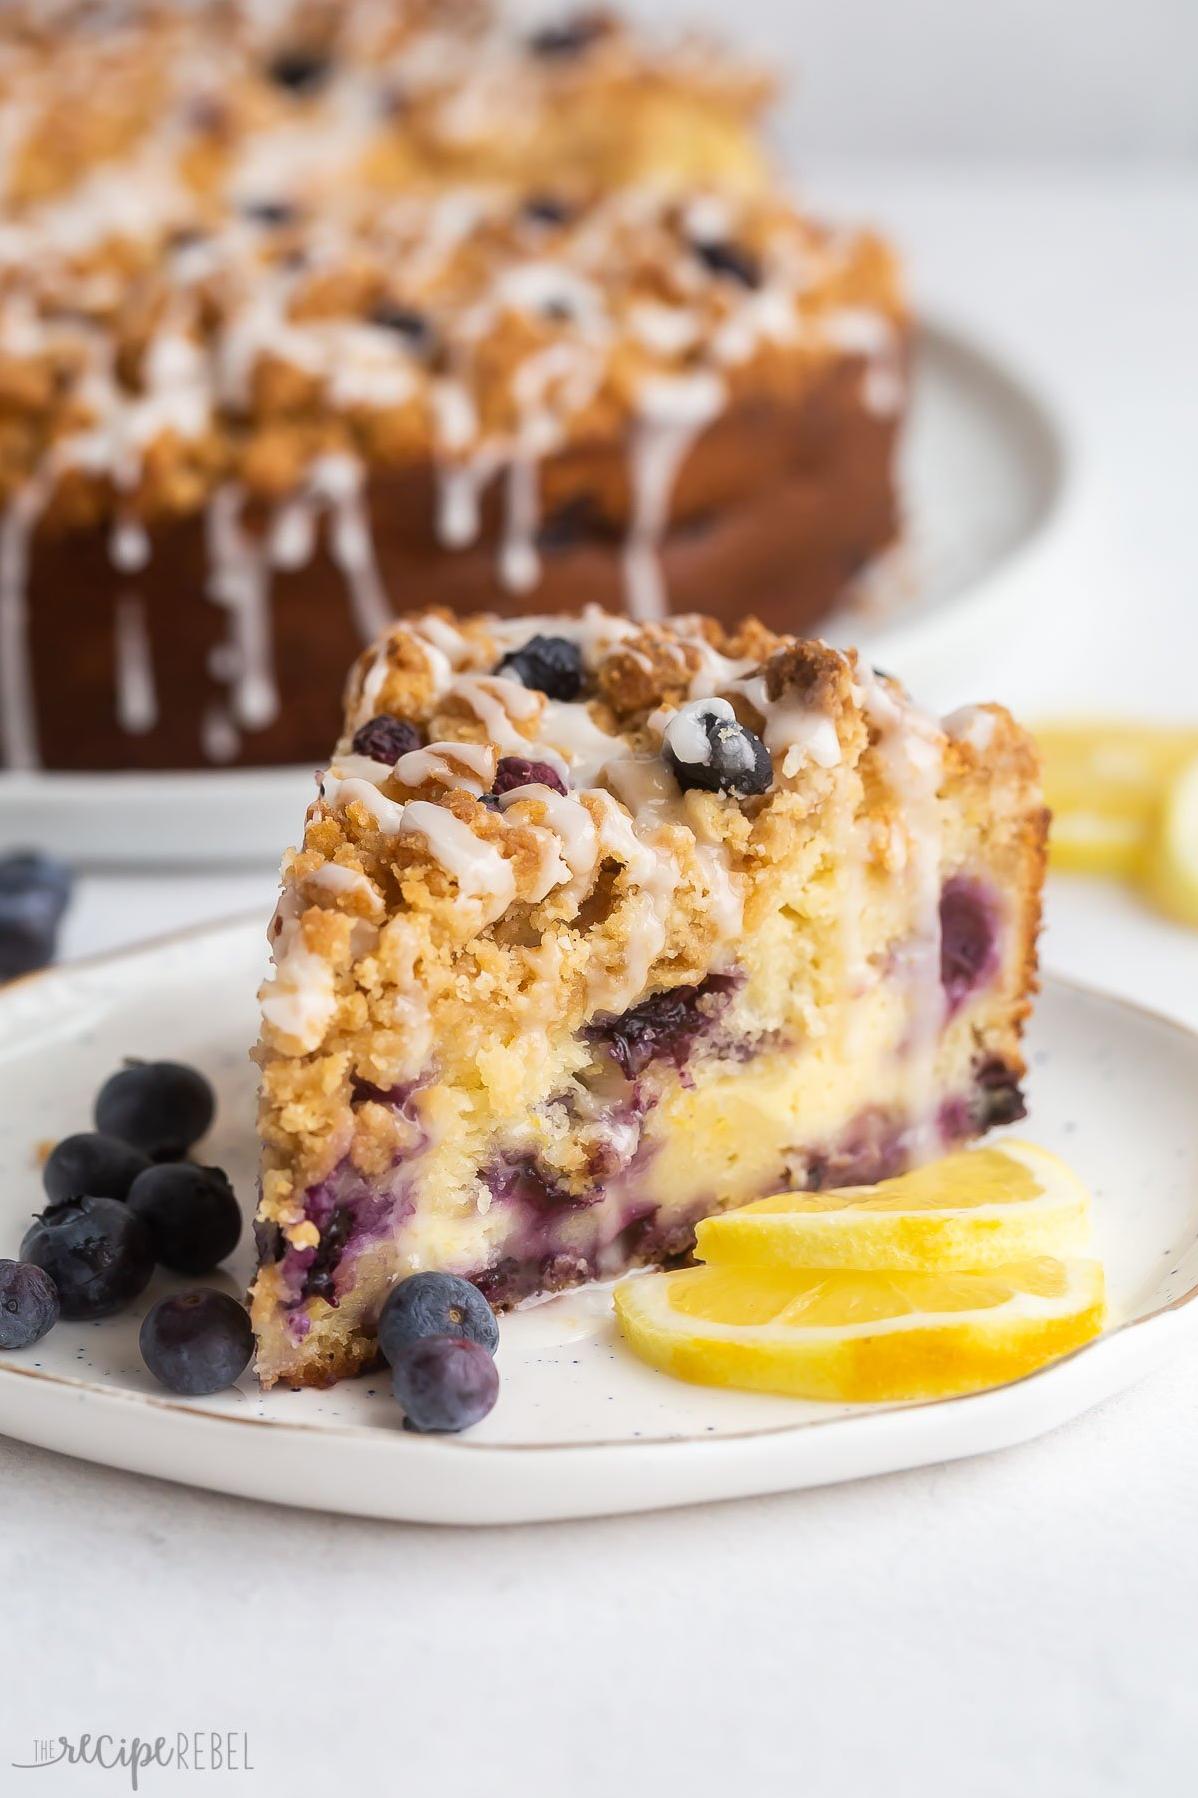  Sink your teeth into the juicy blueberries baked into our cake.